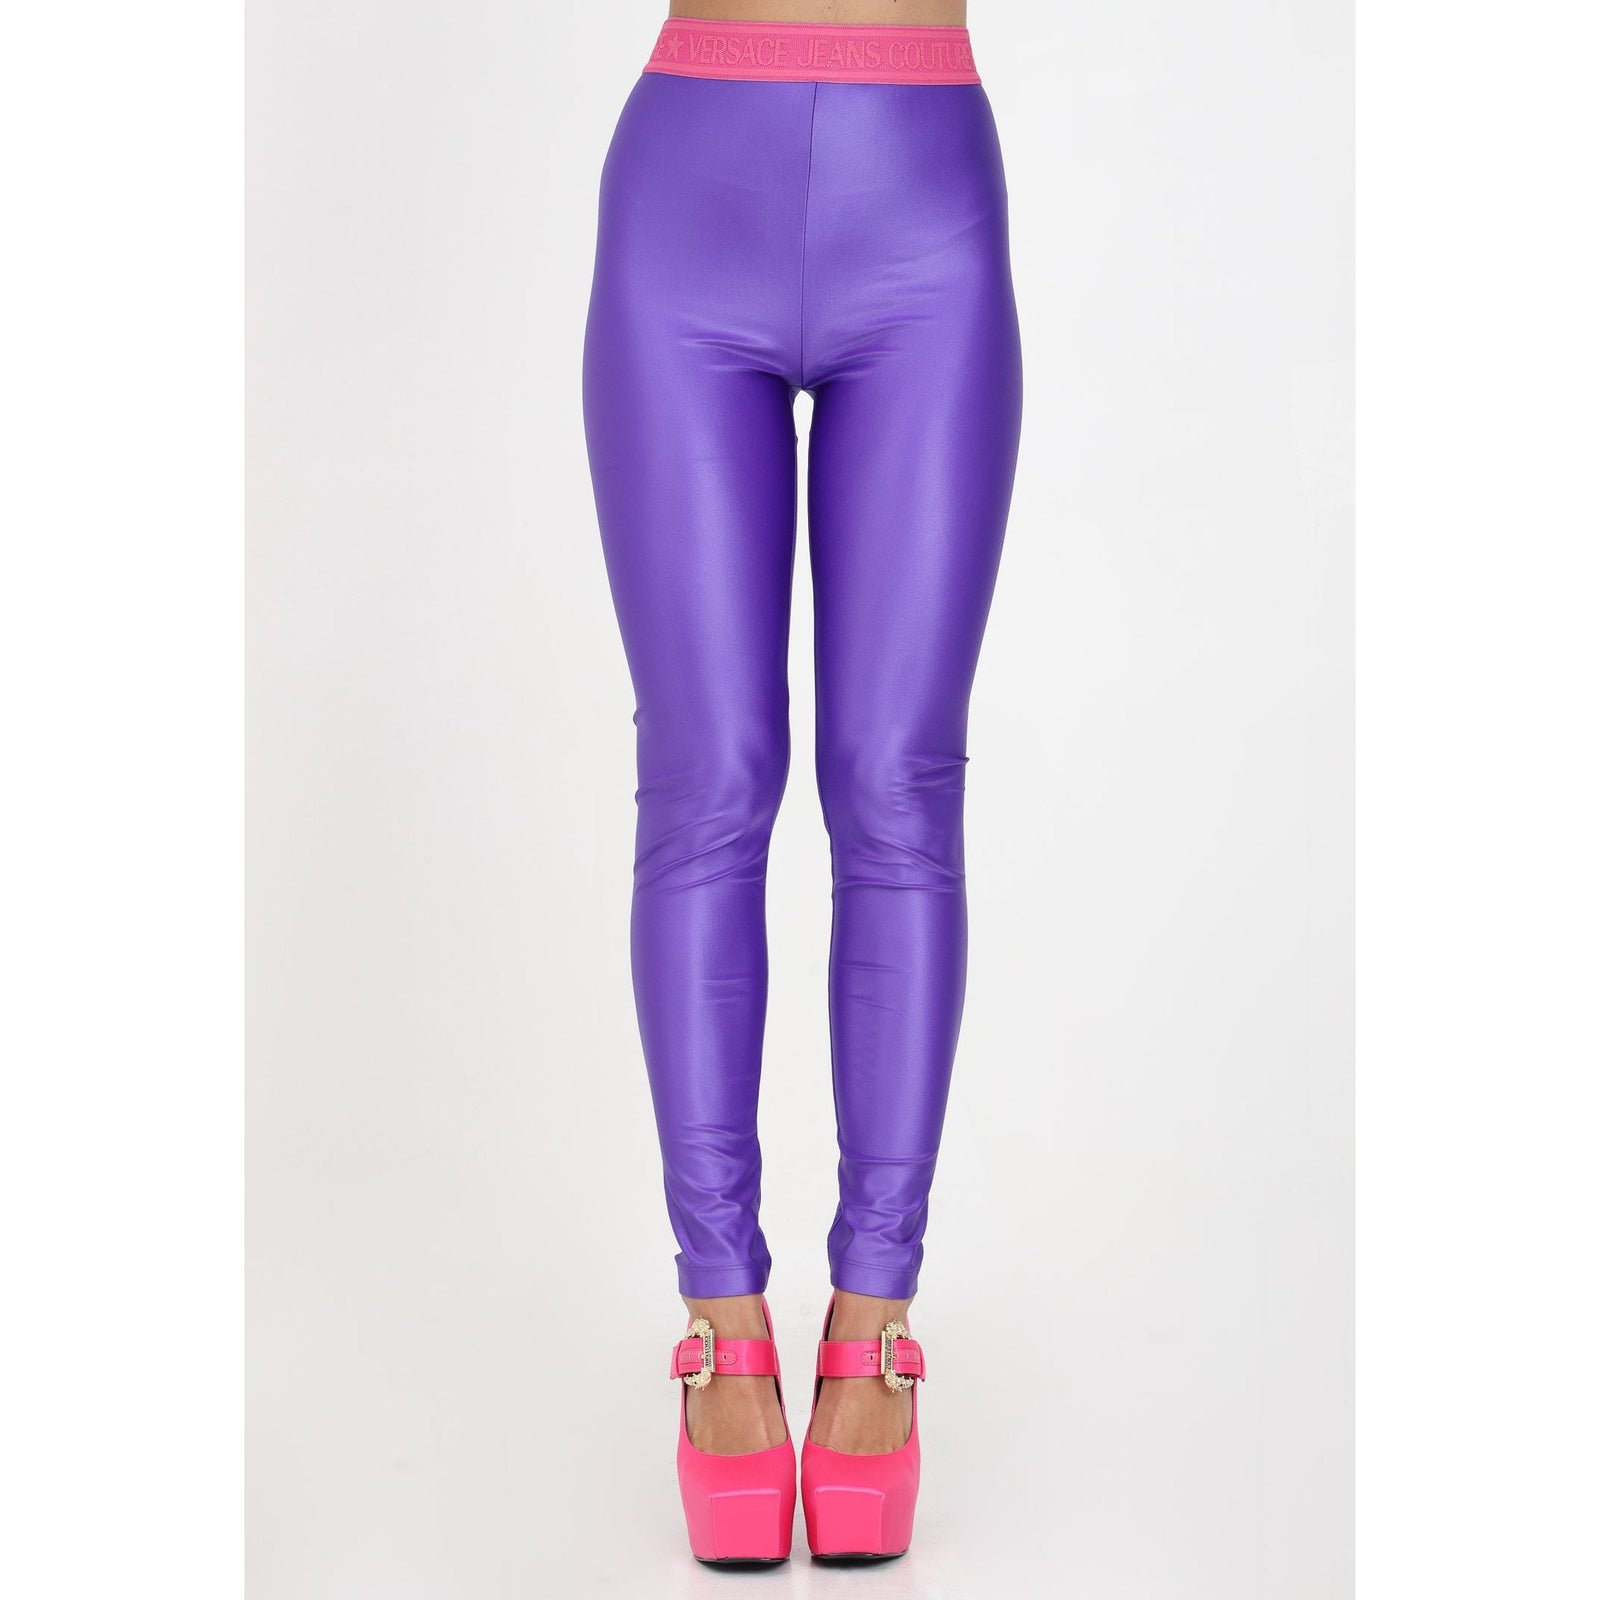 VERSACE JEANS COUTURE LEGGINGS WITH LOGOED BAND - Yooto